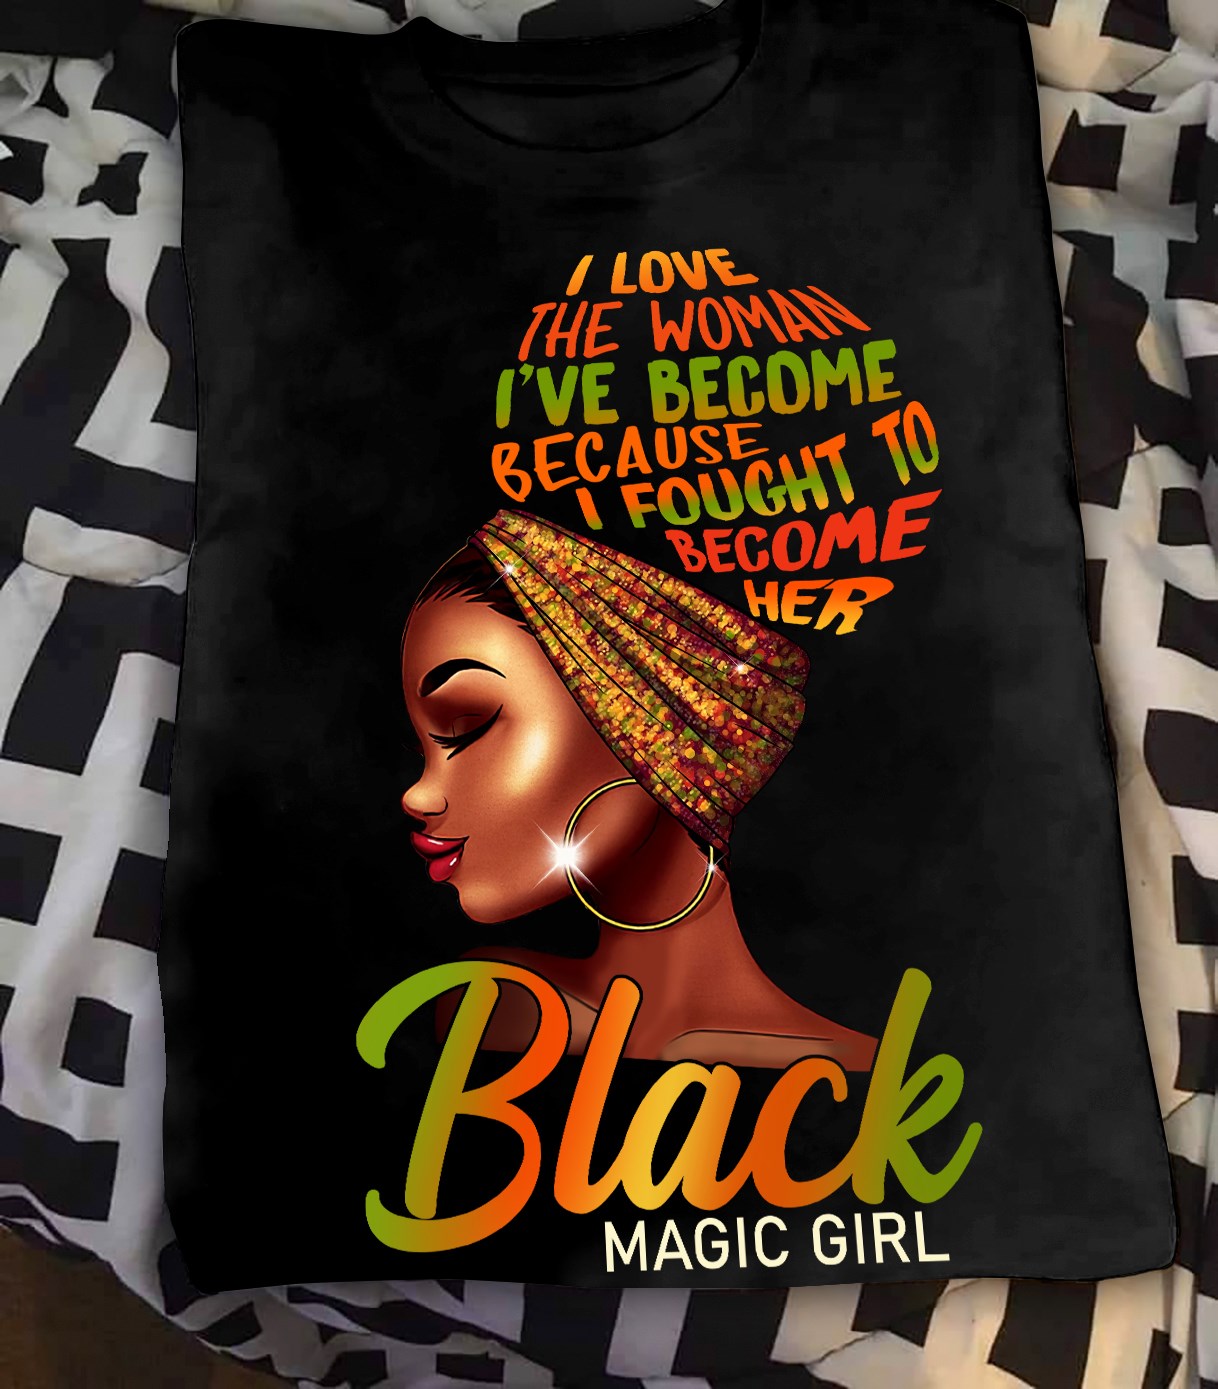 I love the woman I've become I fought to become her - Black magic girl